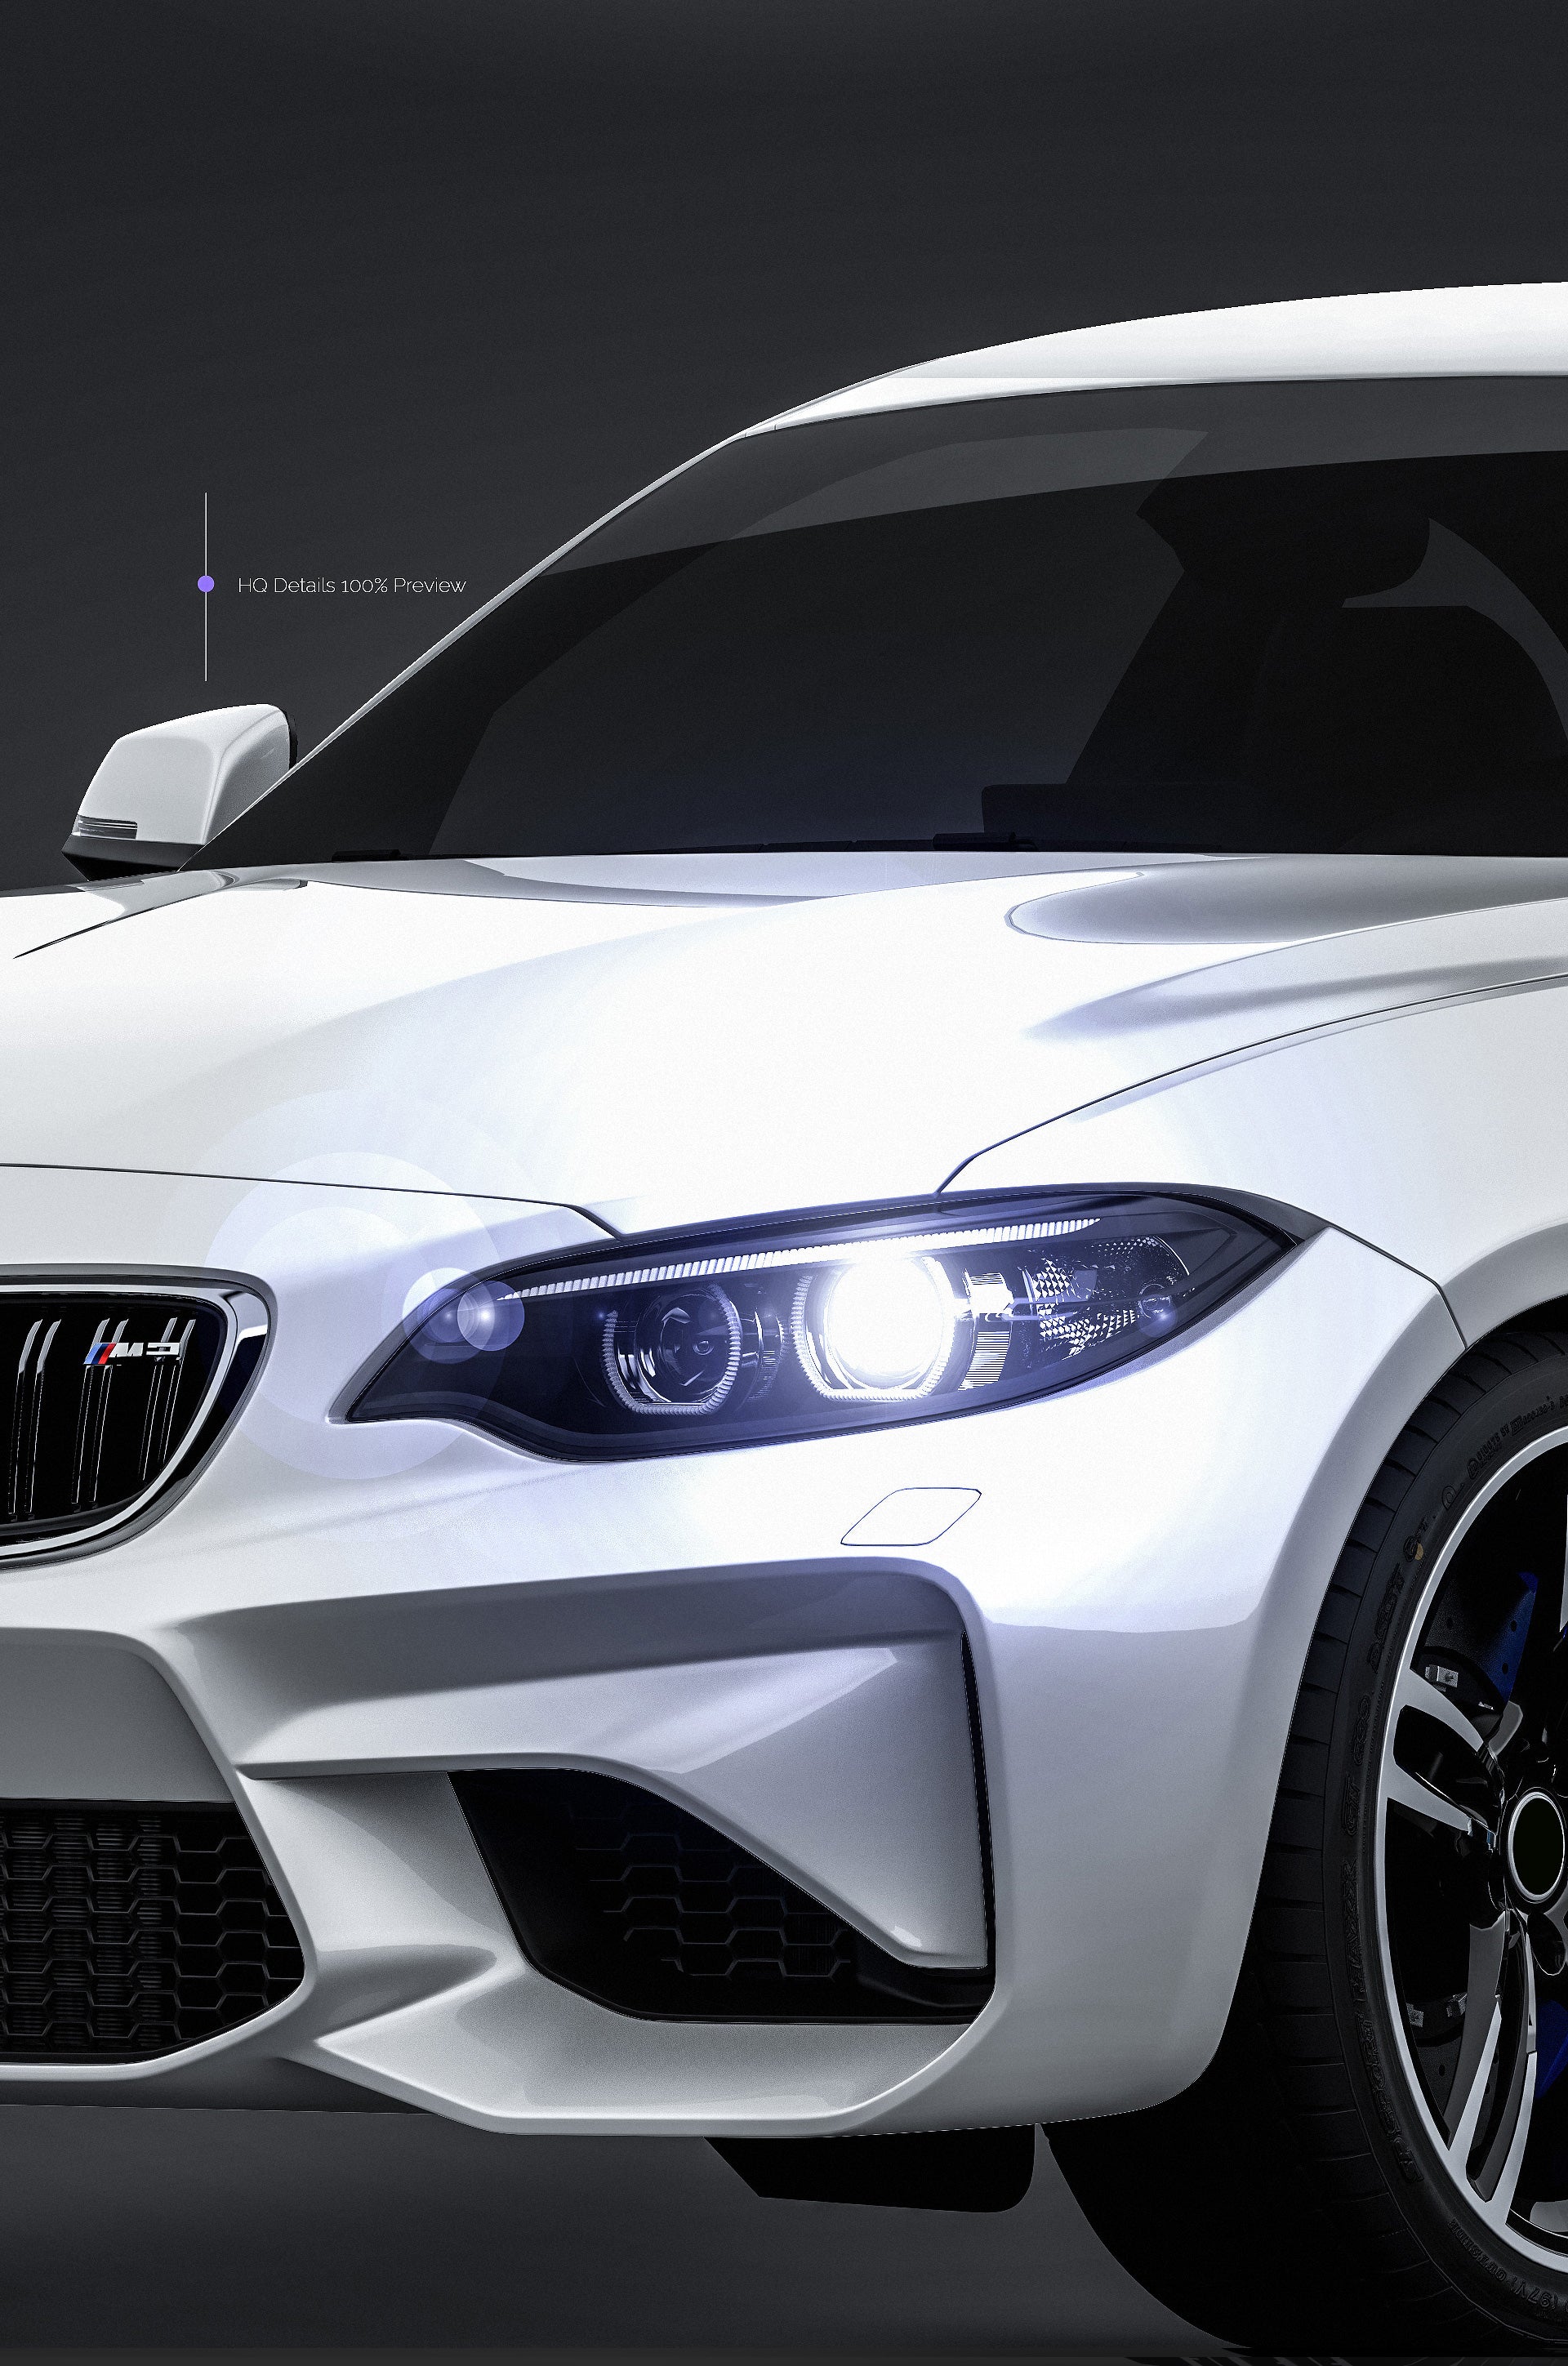 BMW M2 Coupe glossy finish - all sides Mockup Template.psd